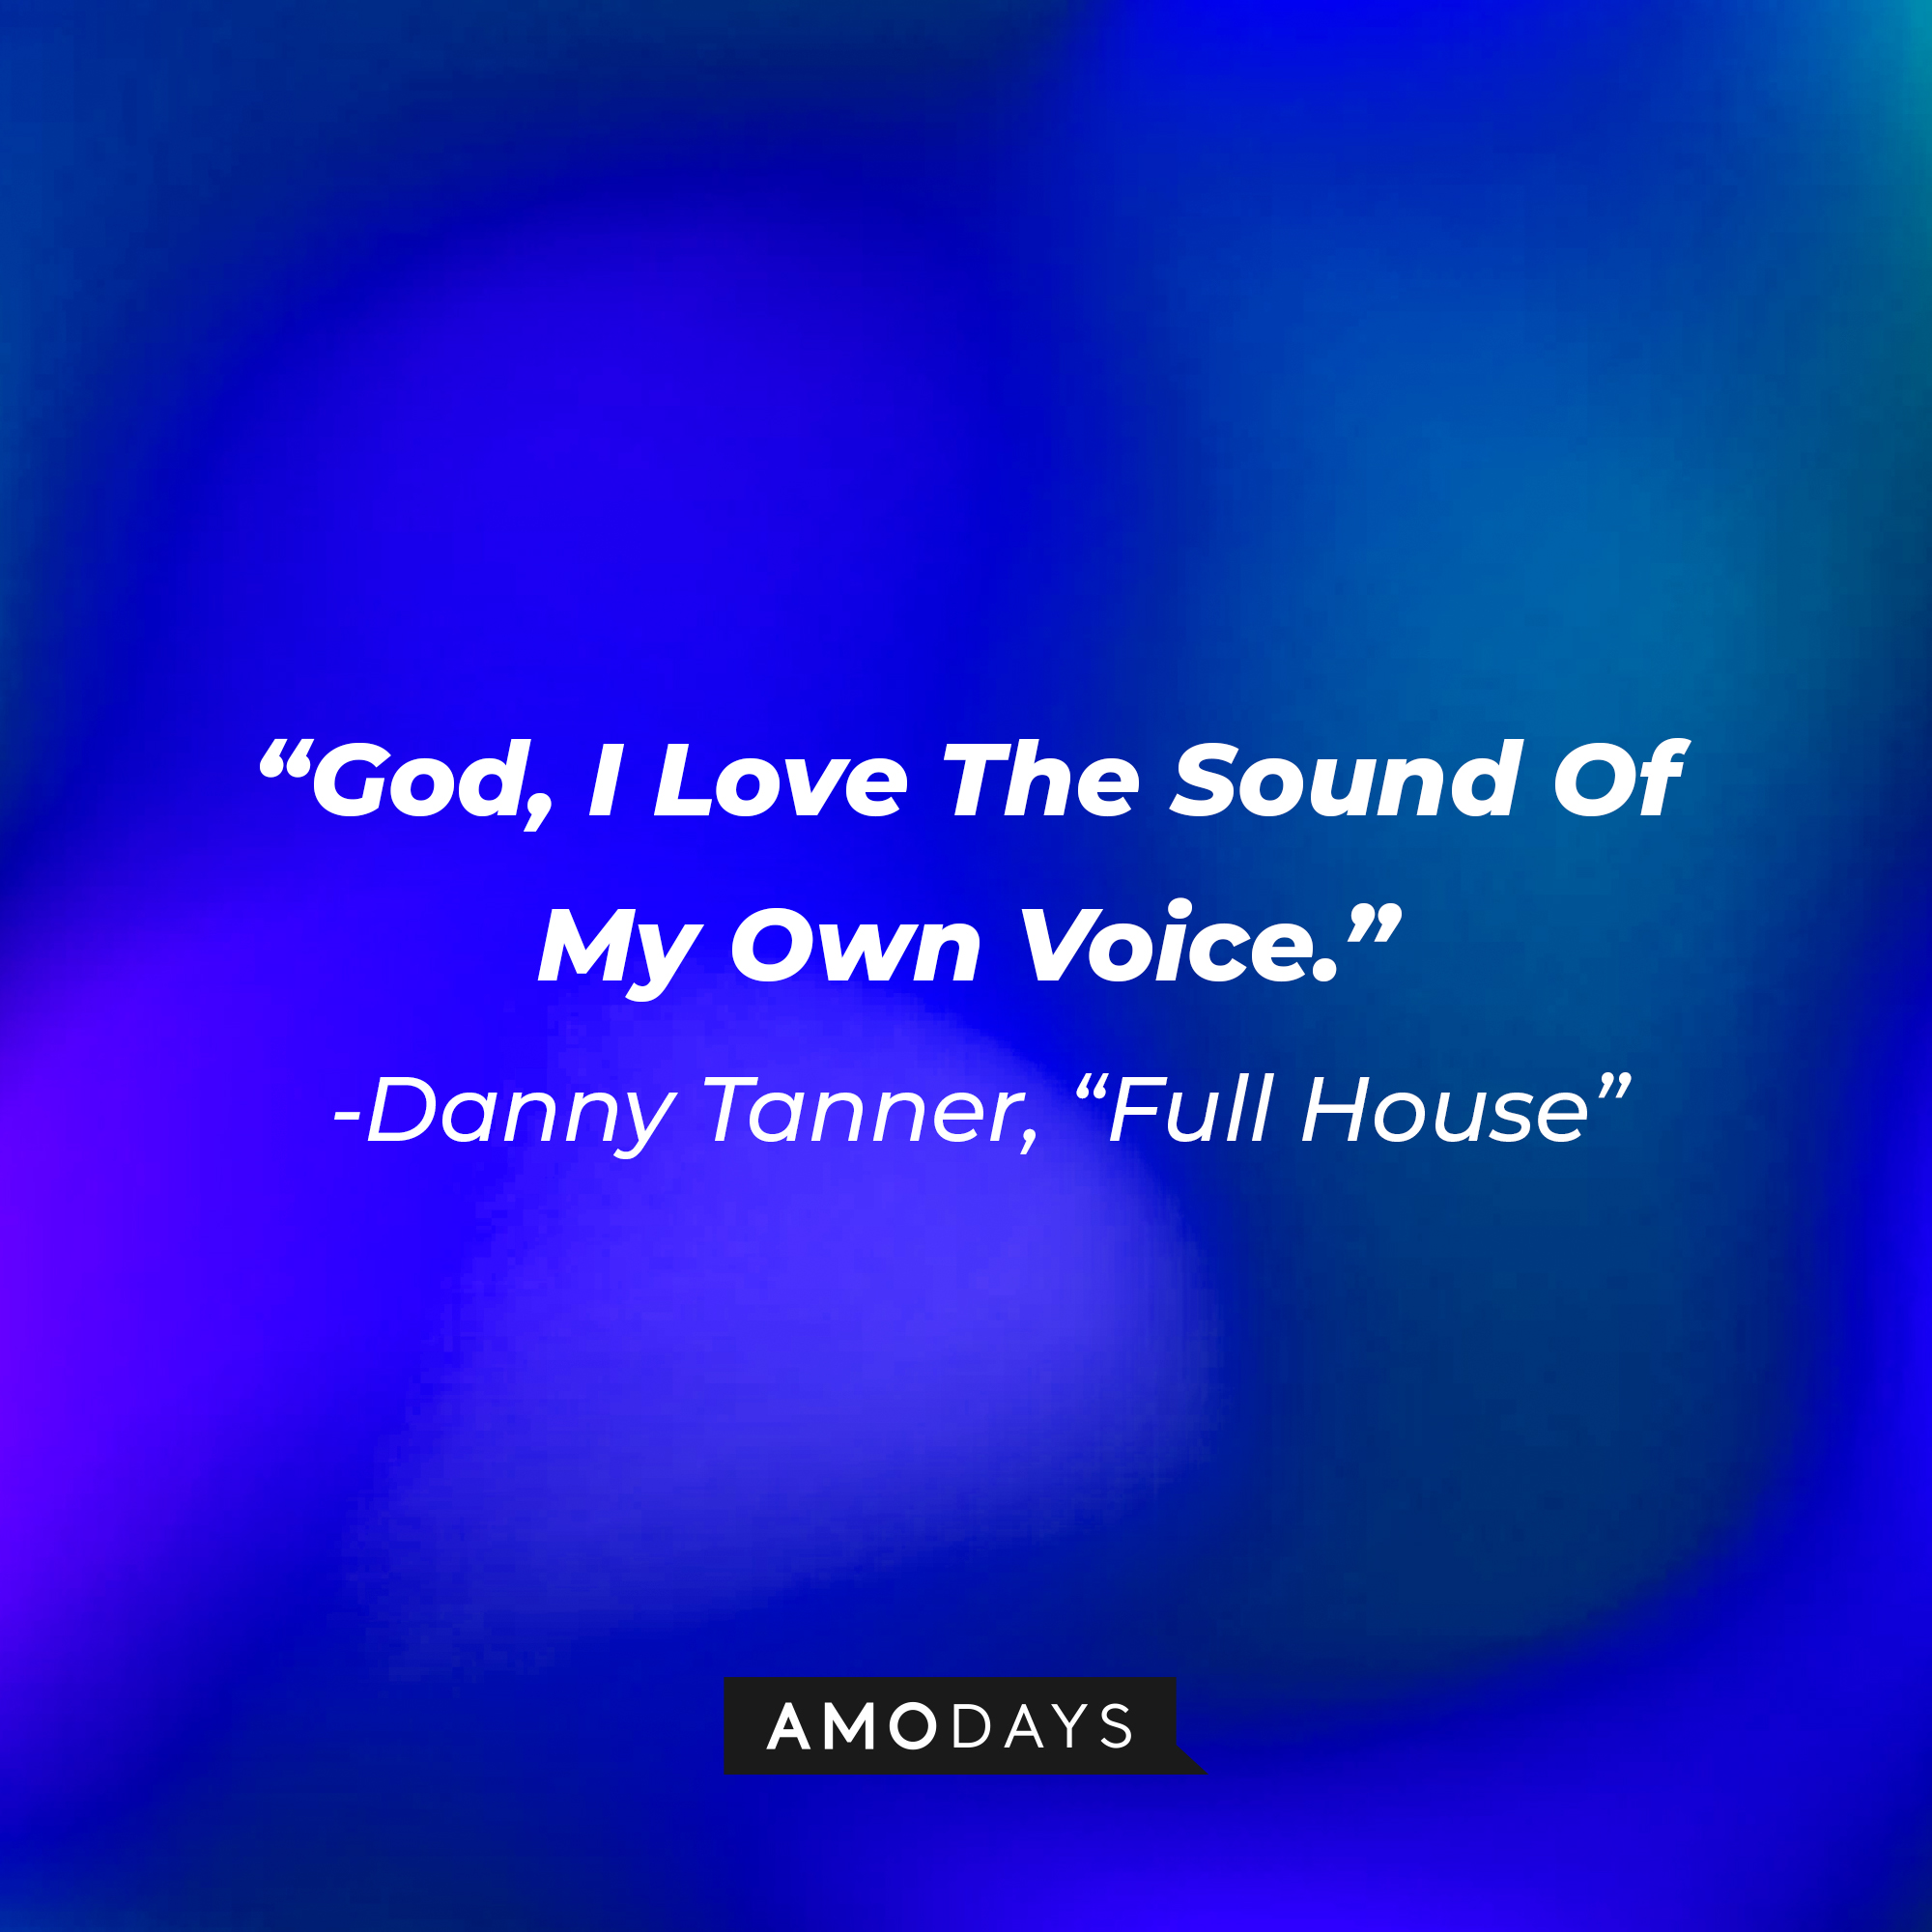 Danny Tanner's quote from "Full House" : "God, I Love The Sound Of My Own Voice" | Source: facebook.com/FullHouseTVshow